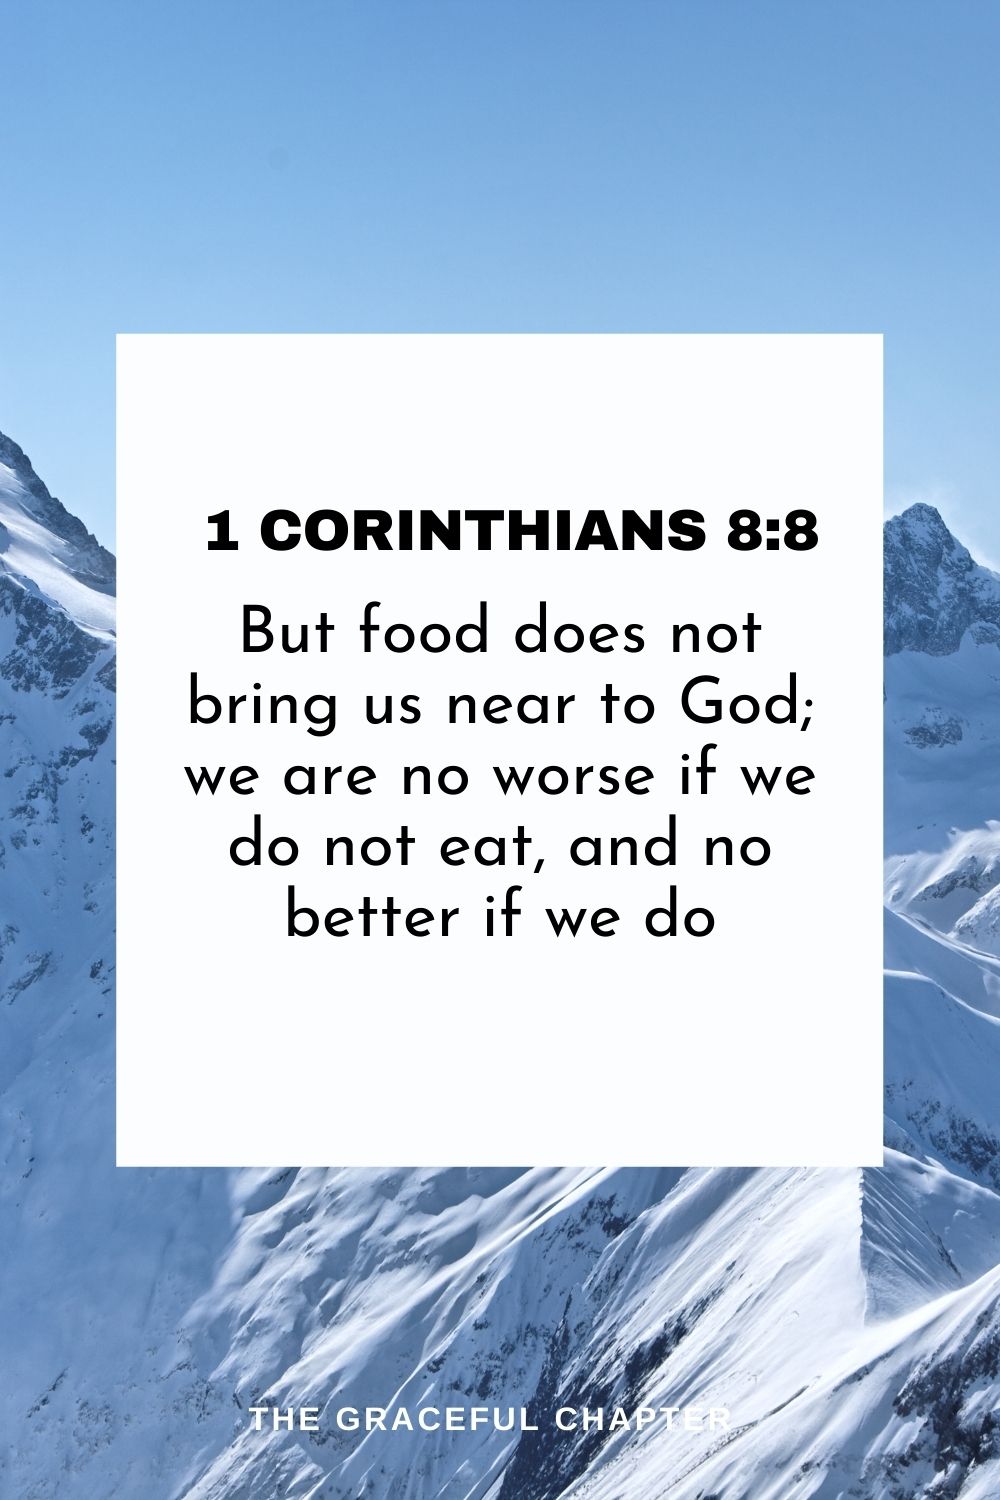 But food does not bring us near to God; we are no worse if we do not eat, and no better if we do. 1 Corinthians 8:8